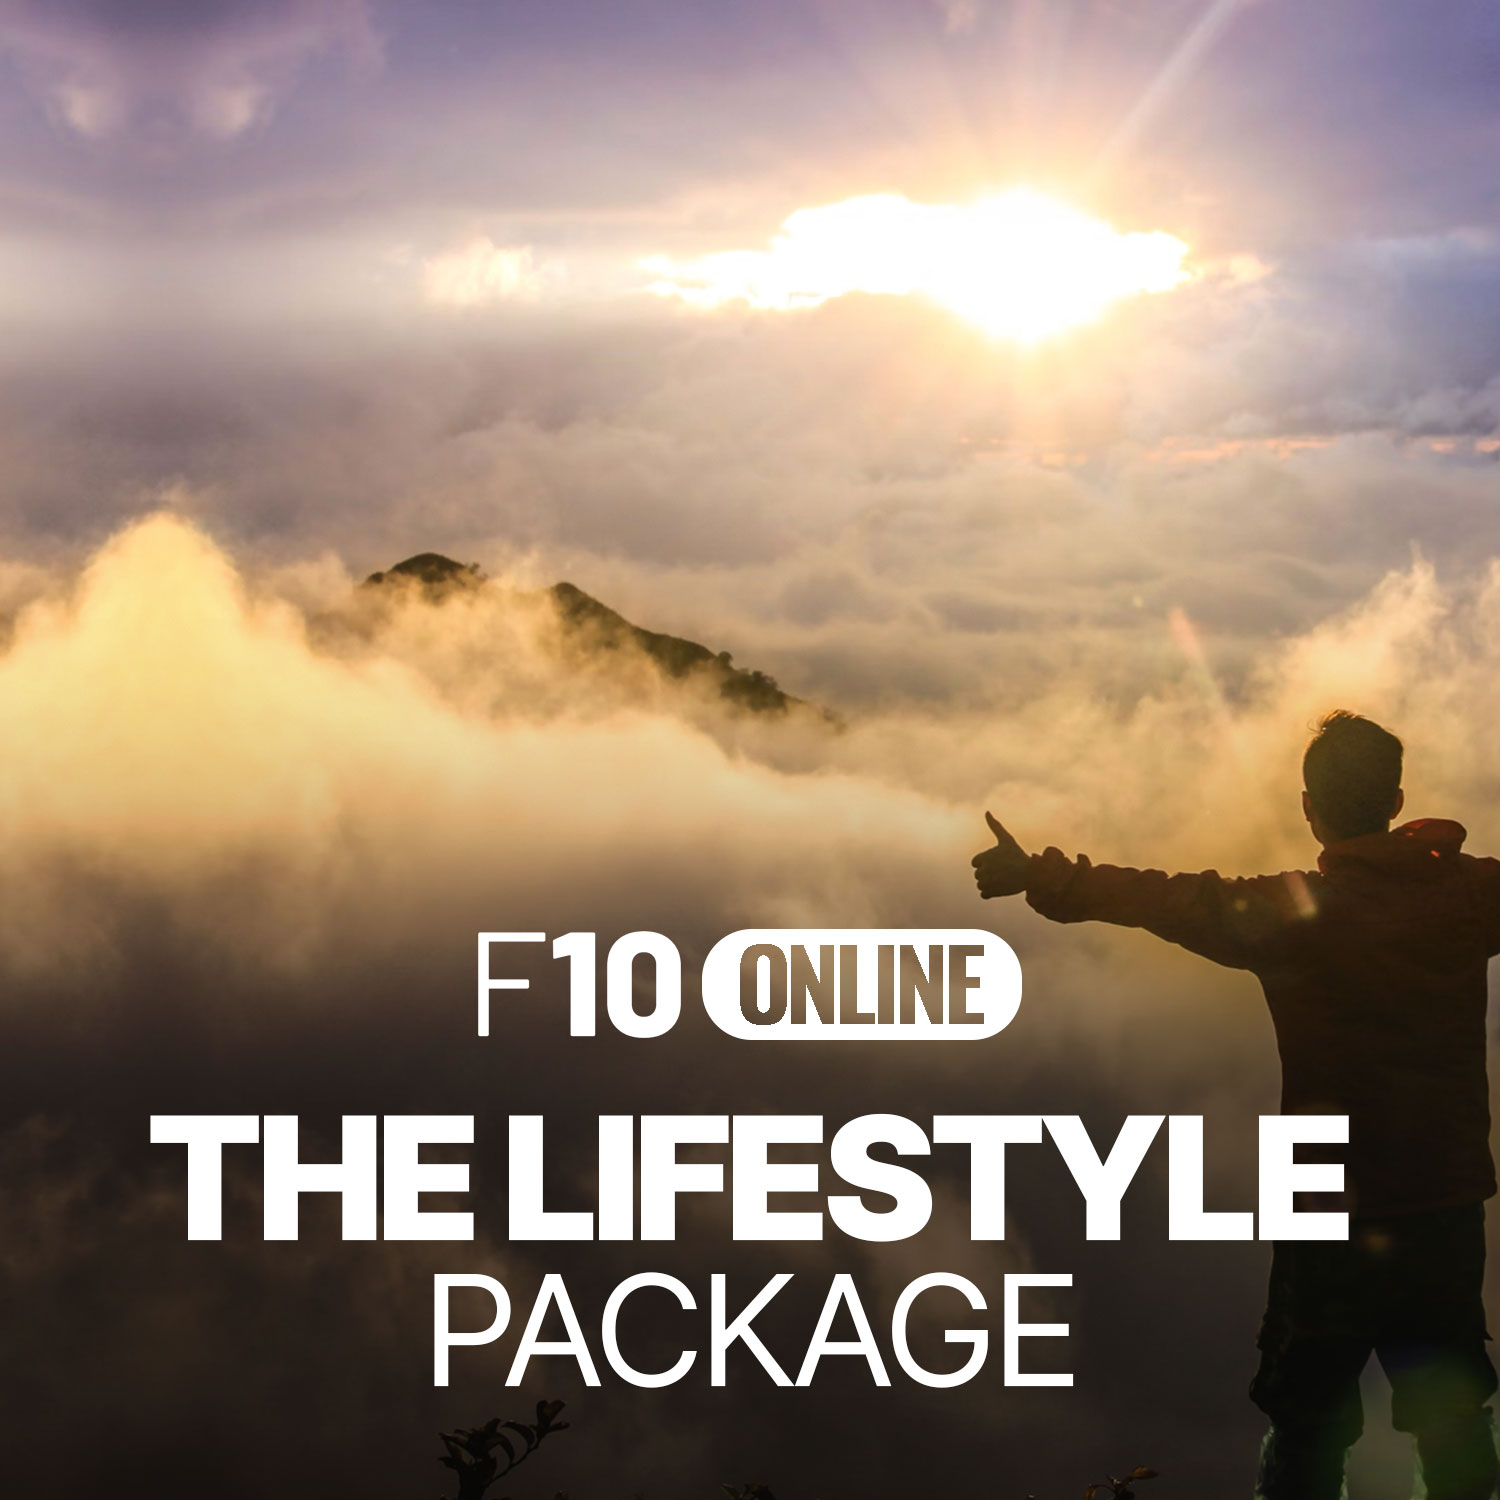 F10 lifestyle package